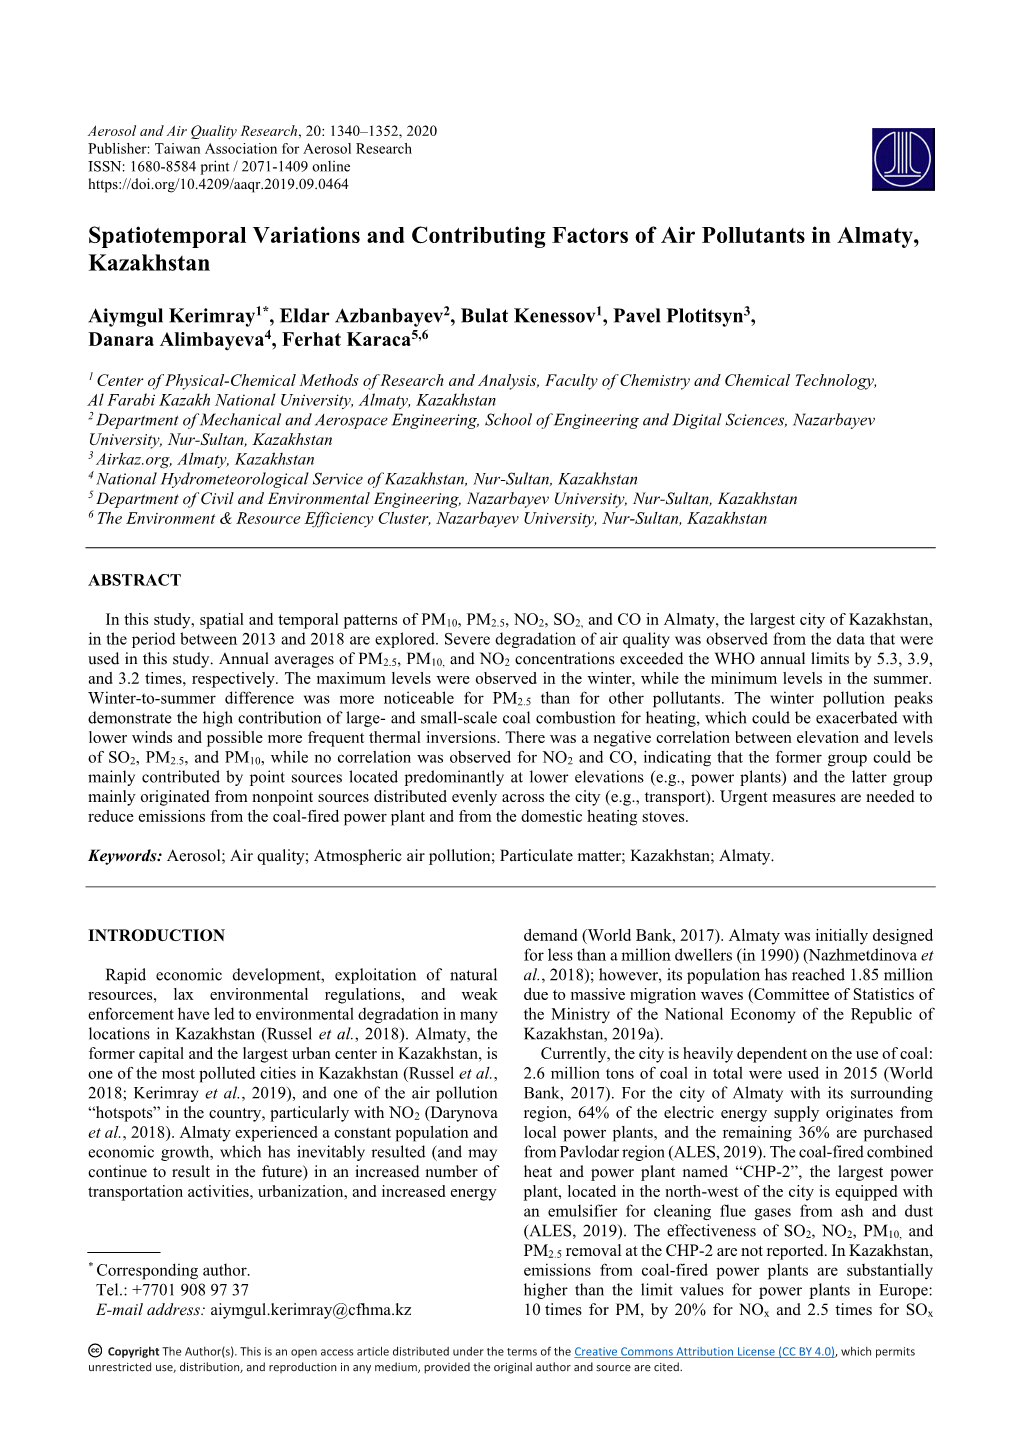 Spatiotemporal Variations and Contributing Factors of Air Pollutants in Almaty, Kazakhstan